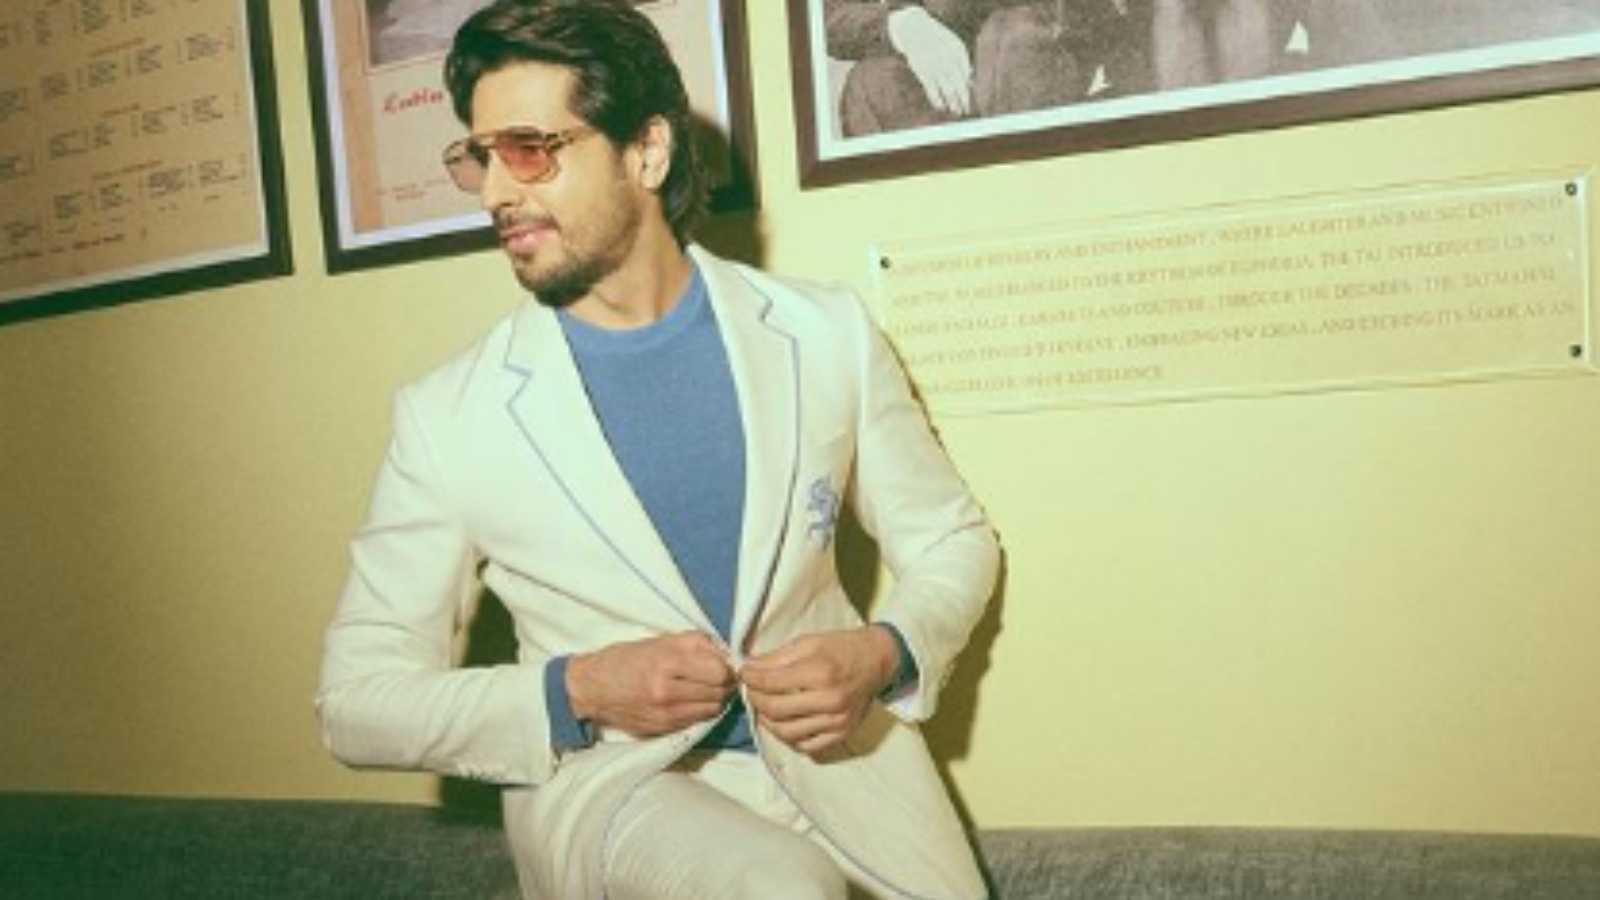 When did Sidharth Malhotra's filmography go downhill? Decoding a string of box office duds